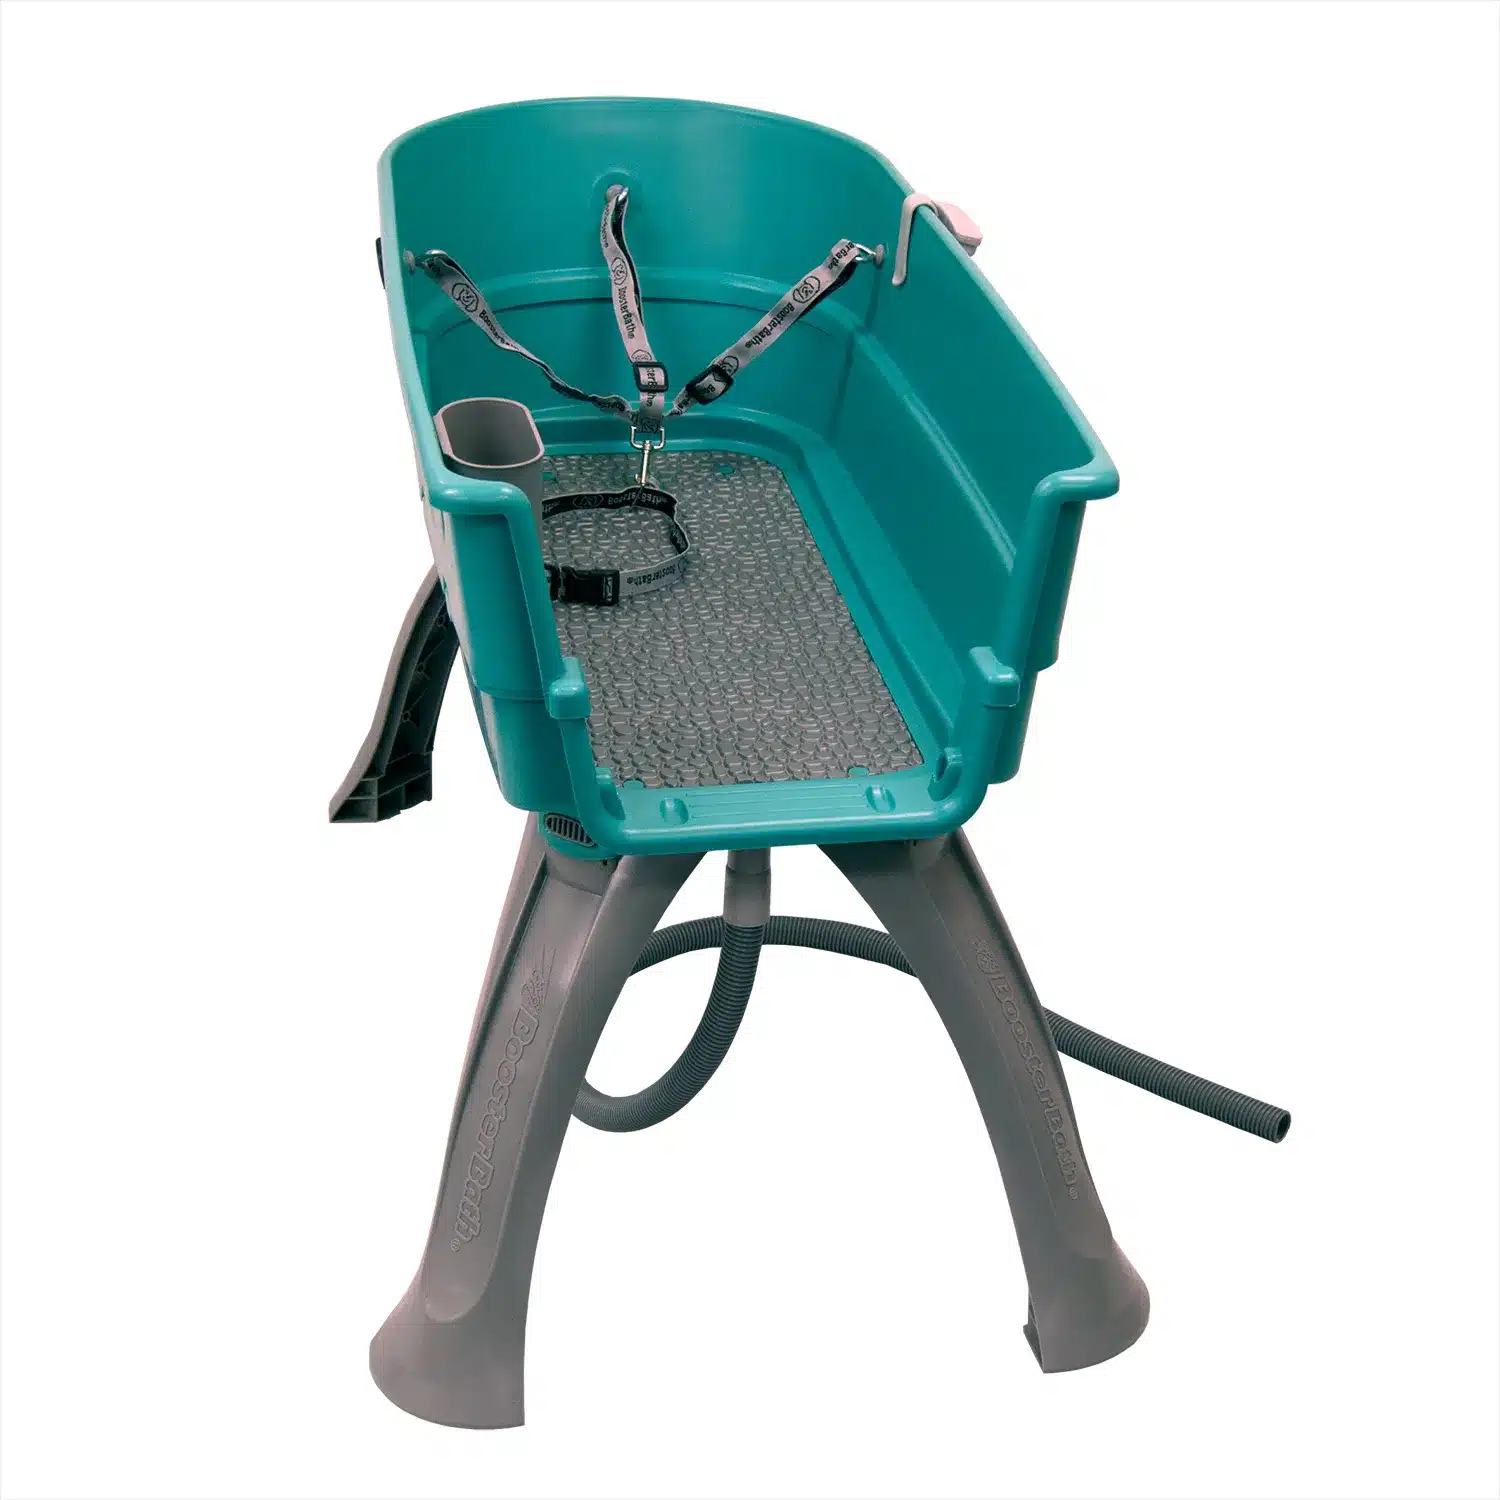 bb-large-teal Elevated Dog Bath and Grooming Center Flat Rate Shipping